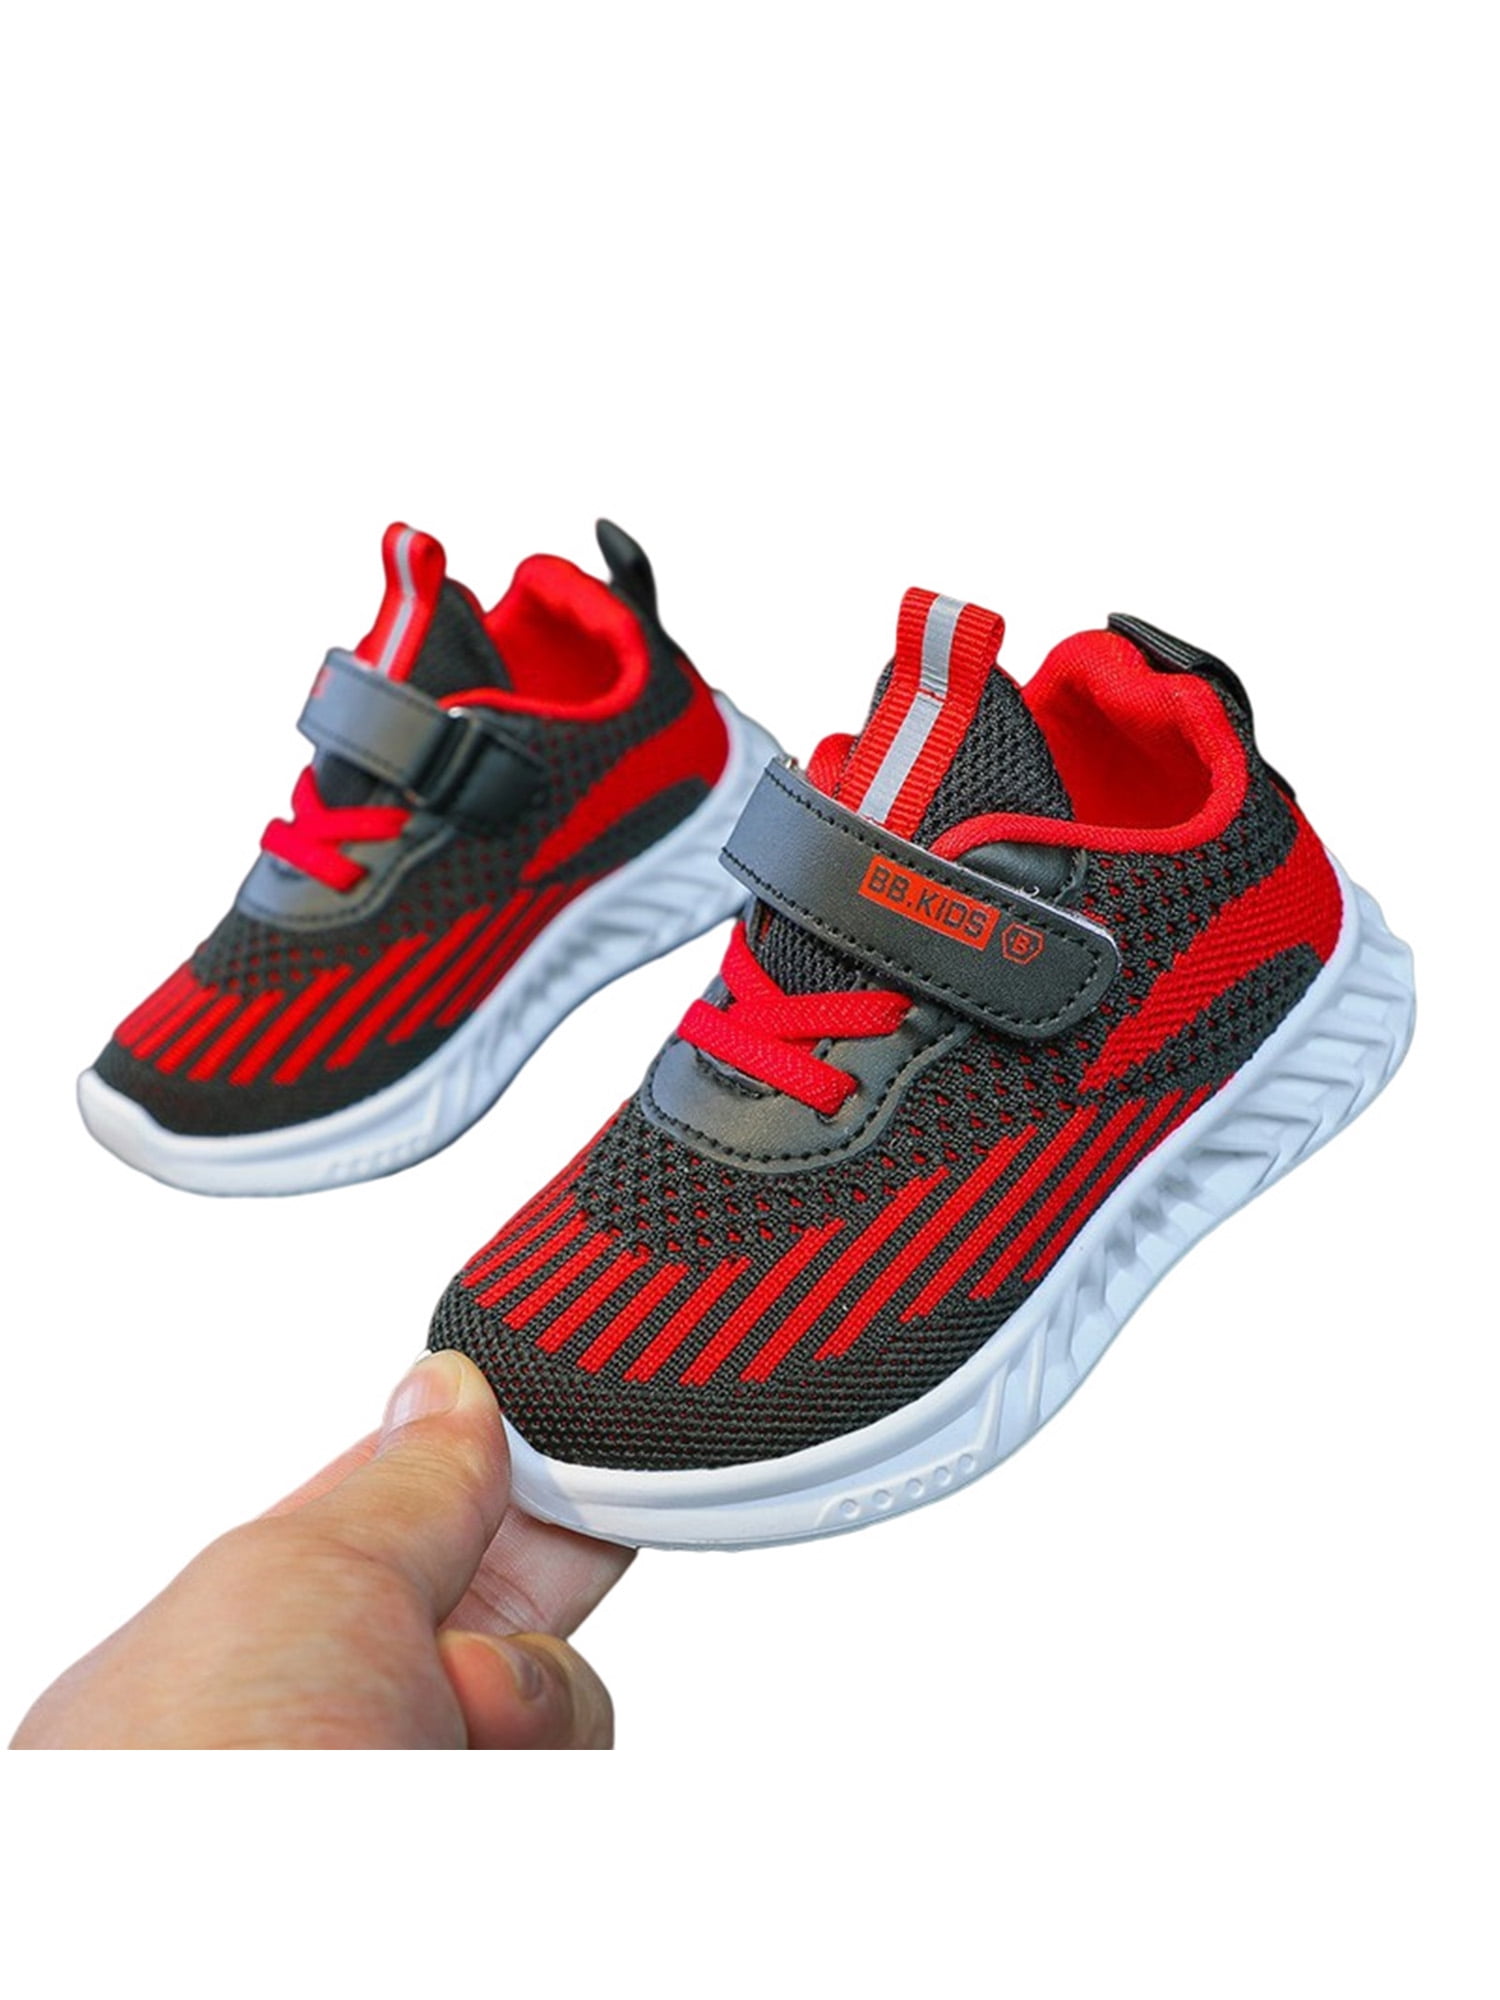 Sweeting Casual Breathable Lace-up Running Shoes Little Kid/Big Kid 